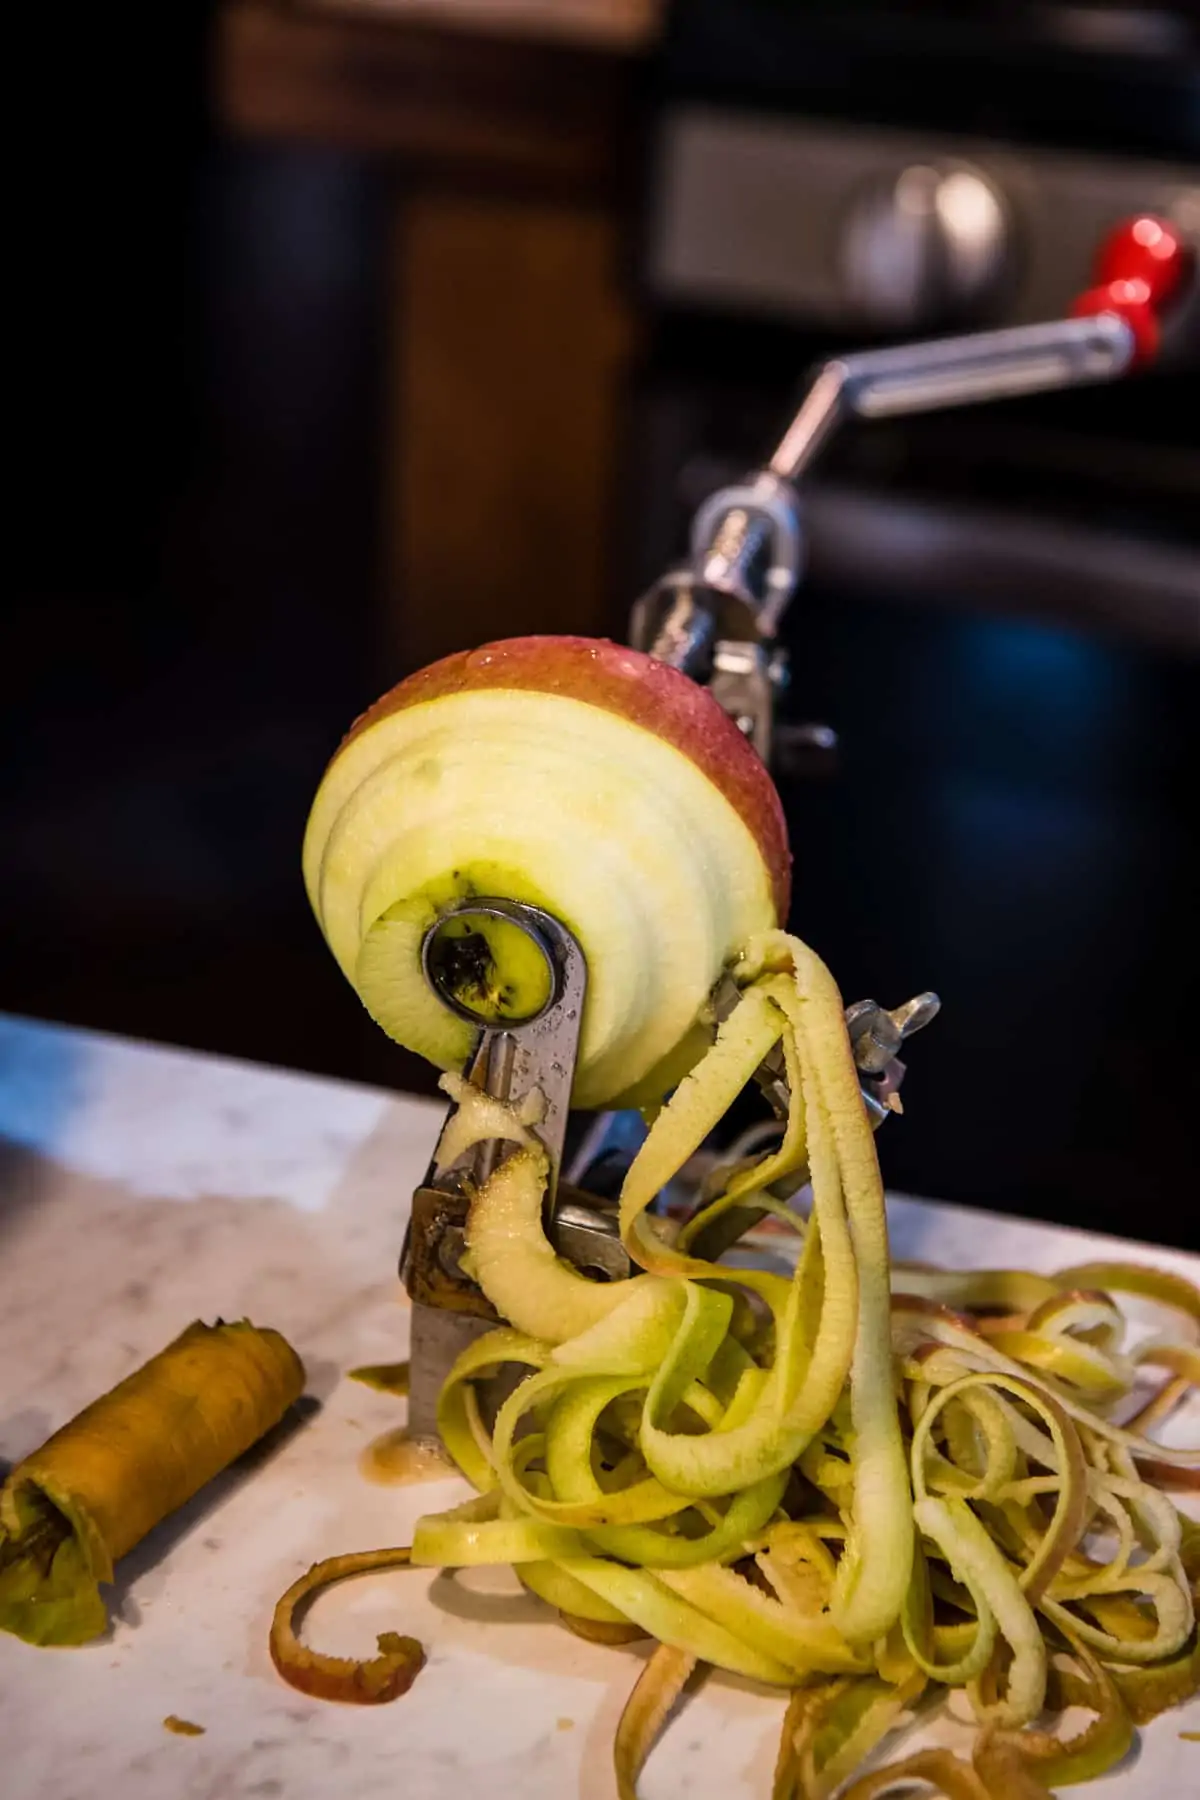 Johnny apple peeler for peeling, coring, and slicing apples on white countertop